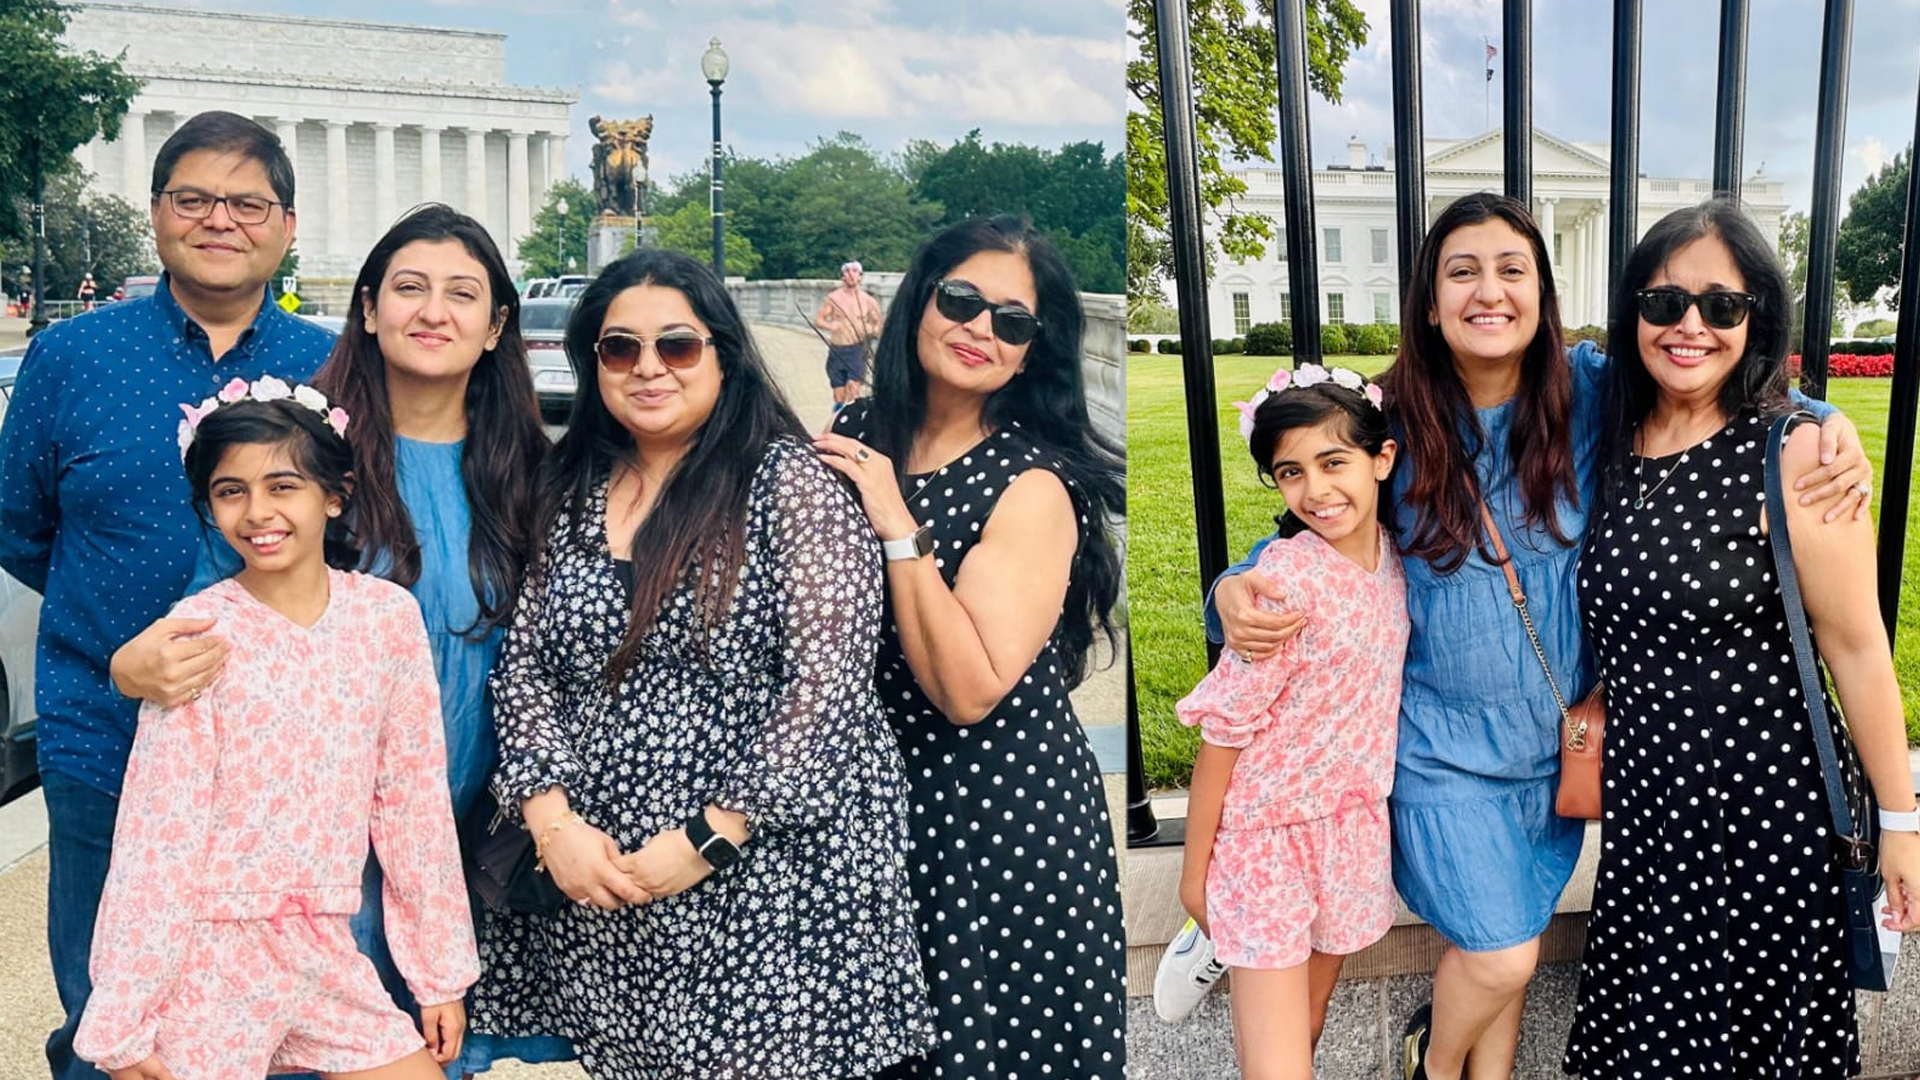 Juhi Parmar’s USA Holiday: A Touching Tale of Unexpected Help and Genuine Humanity